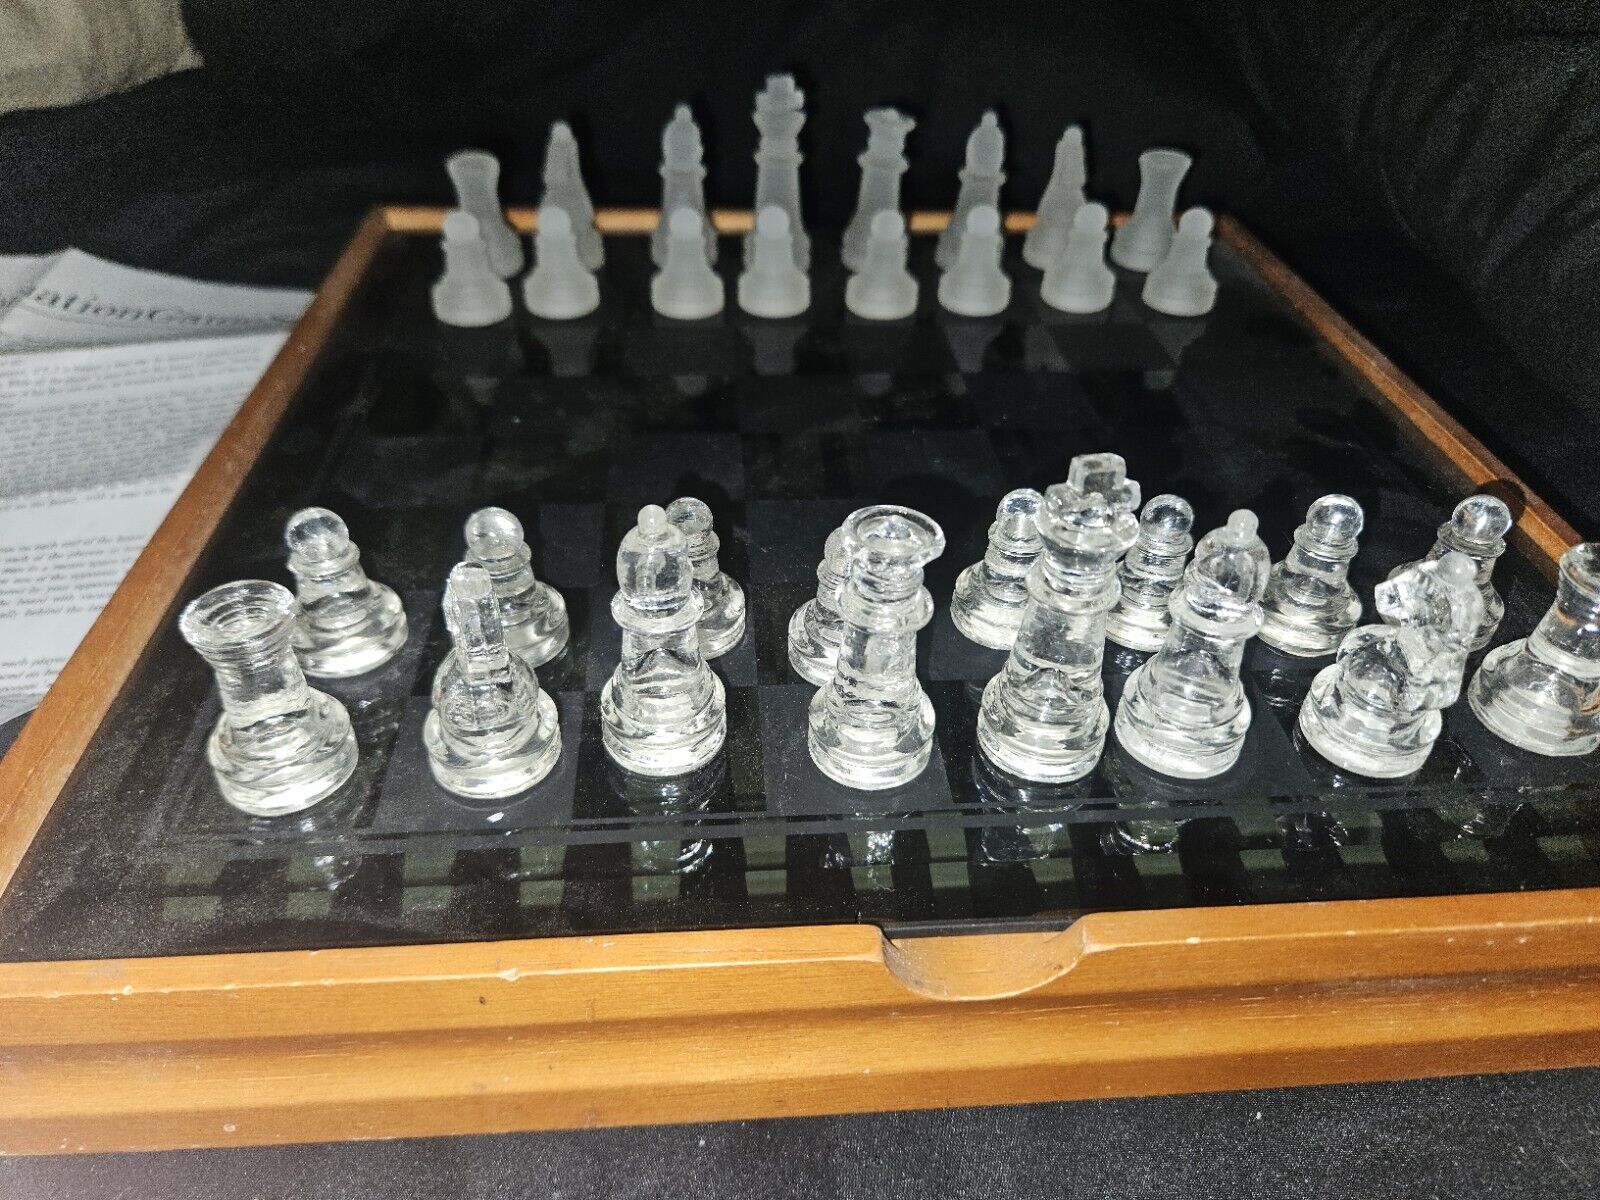 Vintage Wood Crystal Chess Combination Game Set Checkers,backgammon, Cribbage, Errors & Oddities